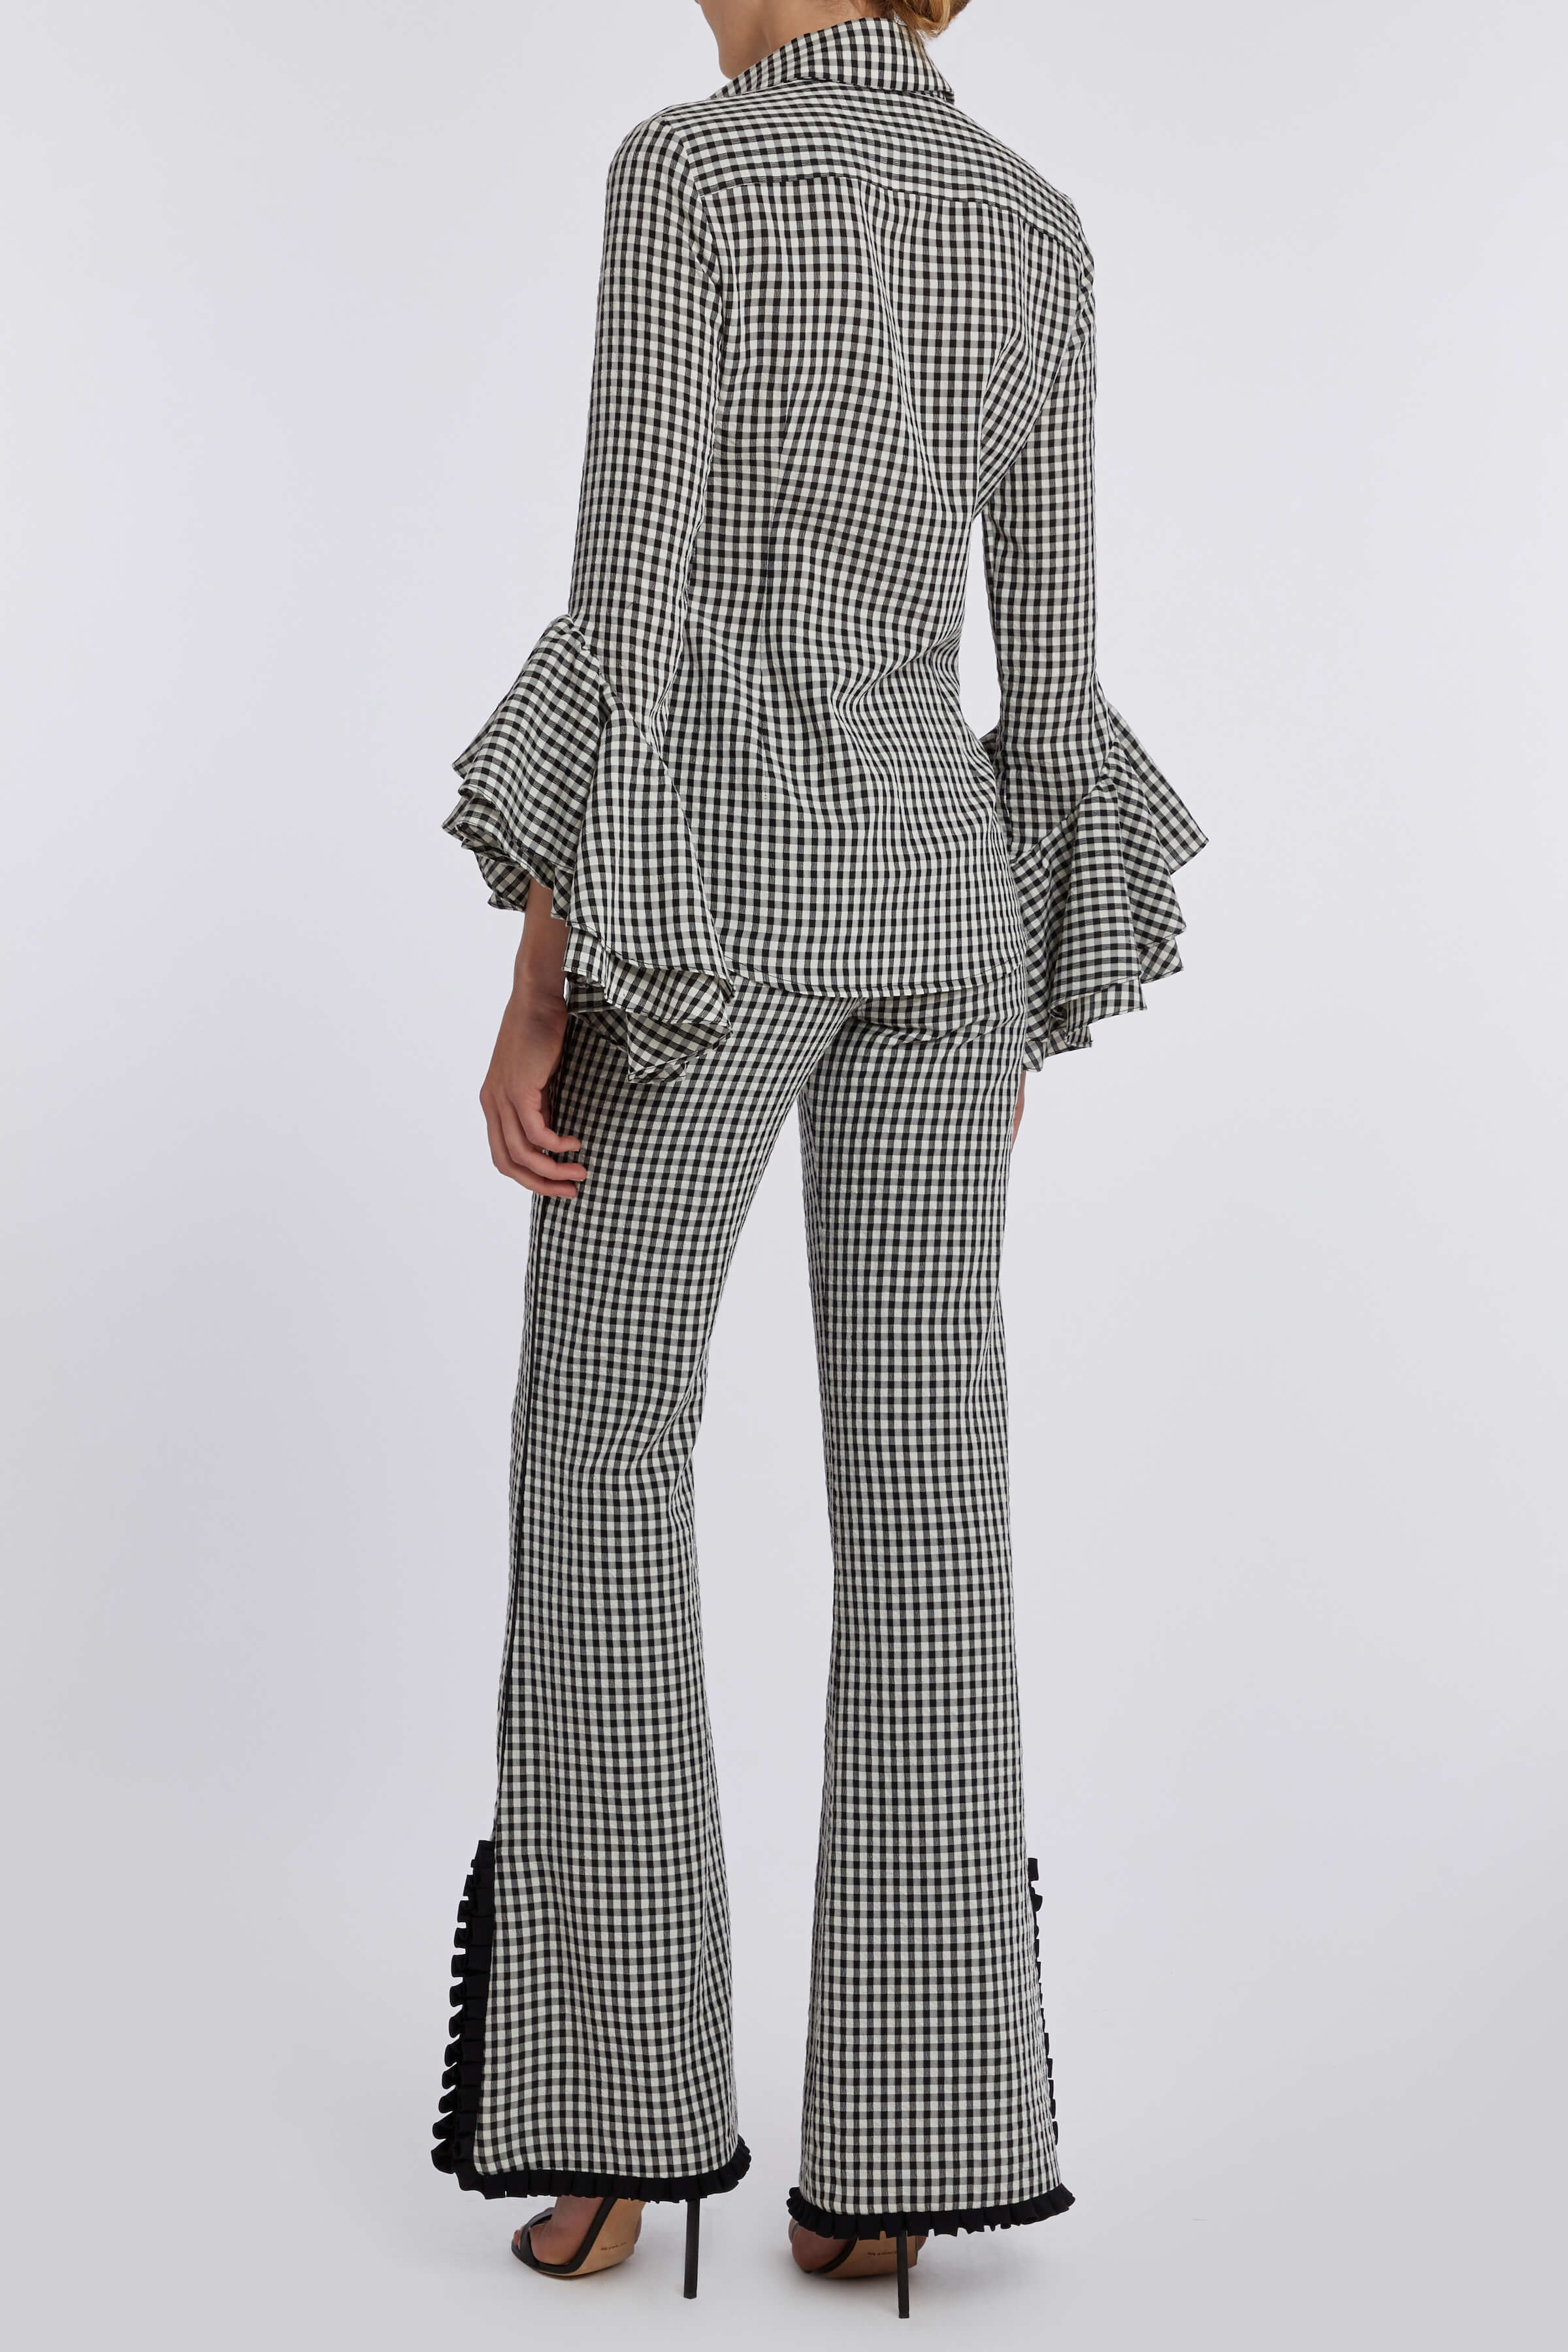 Nina Black and White Gingham Ruffled Sleeve Button Down Top